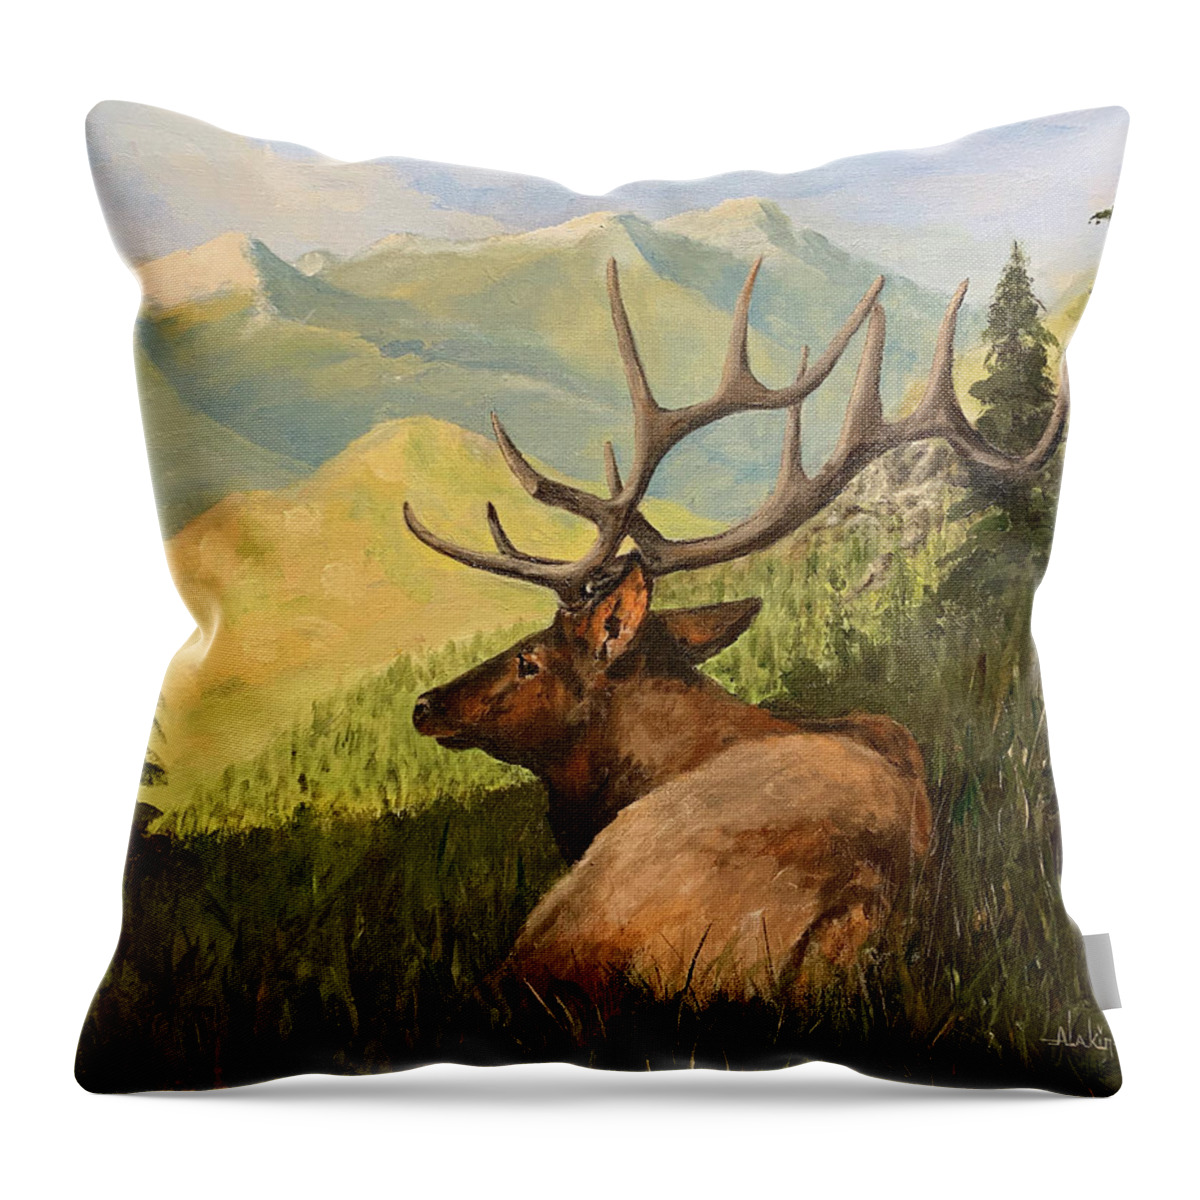 Mountains Throw Pillow featuring the painting Rocky Mountain National Park by Alan Lakin